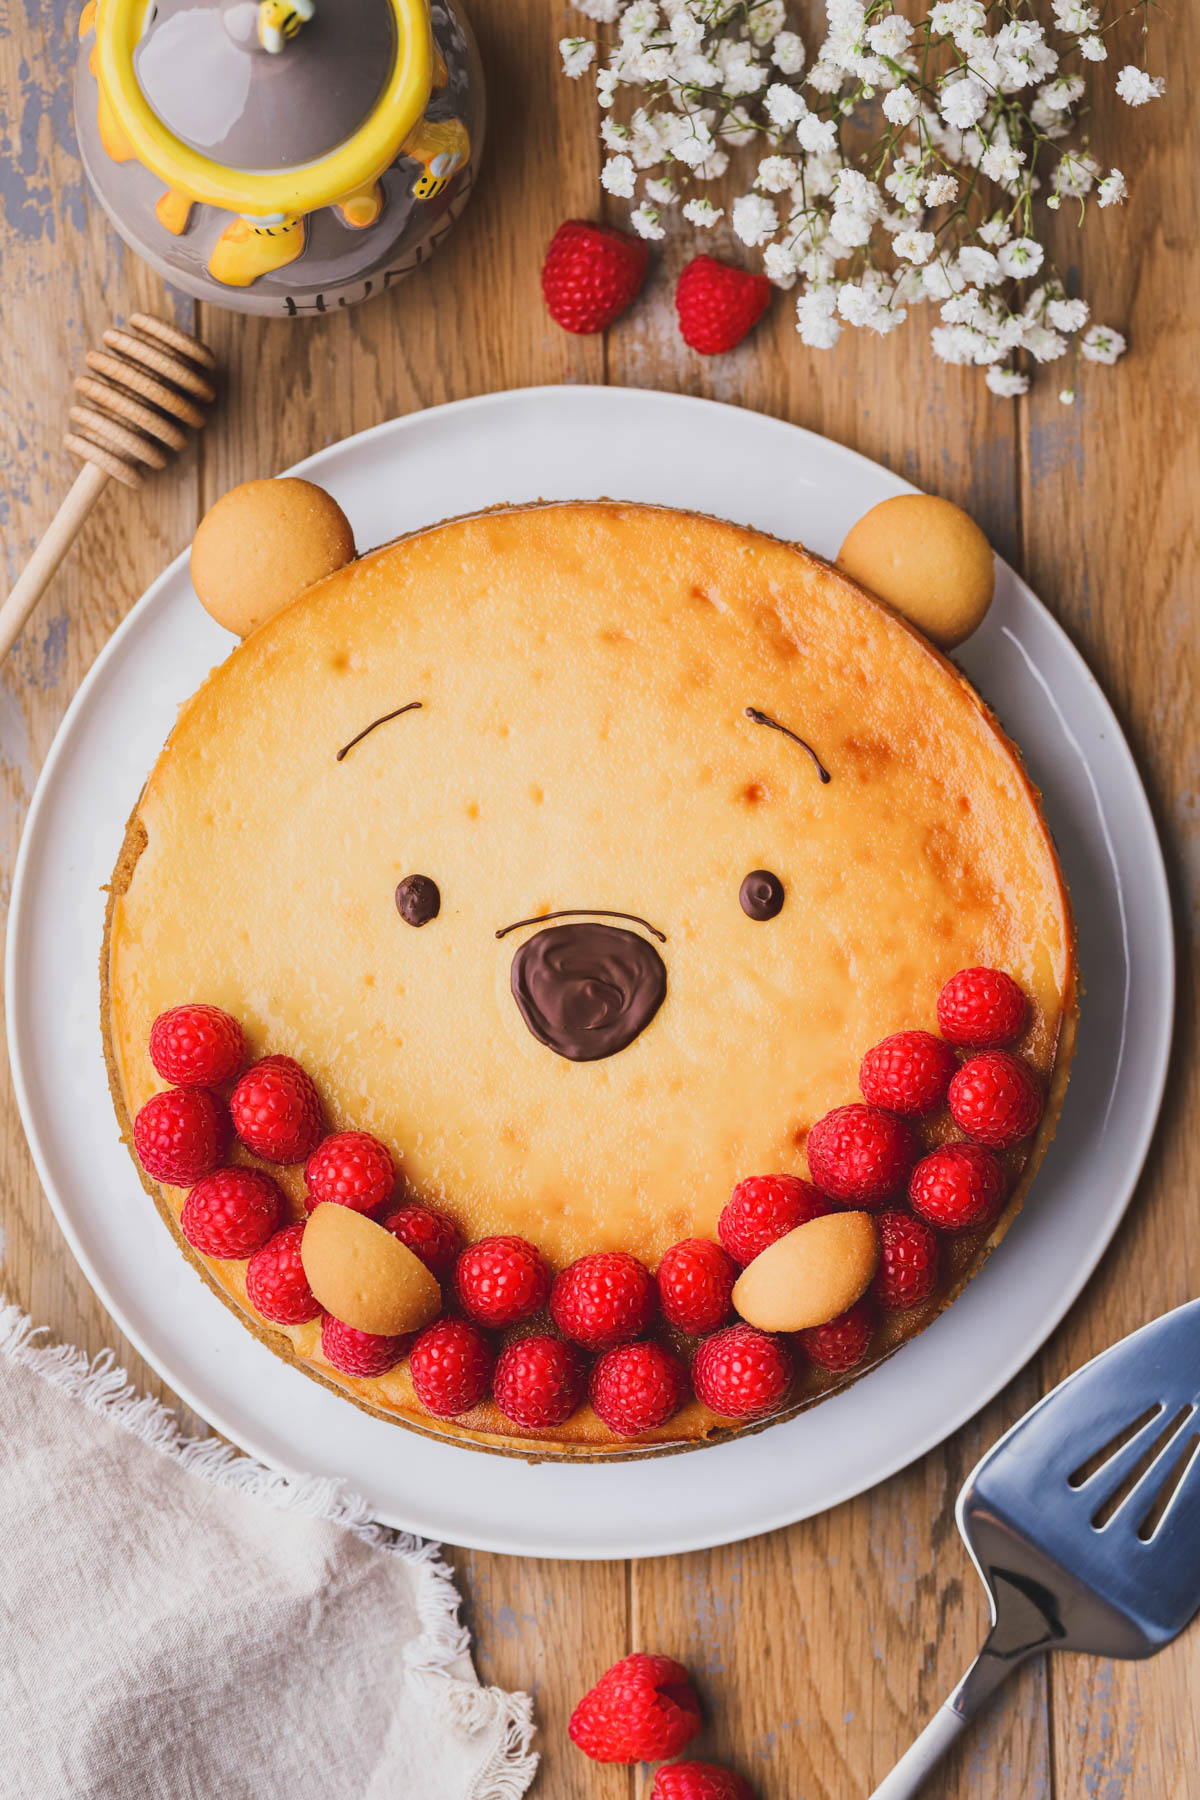 Creamy honey cheesecake with fresh raspberries and decorated as Winnie the Pooh.  